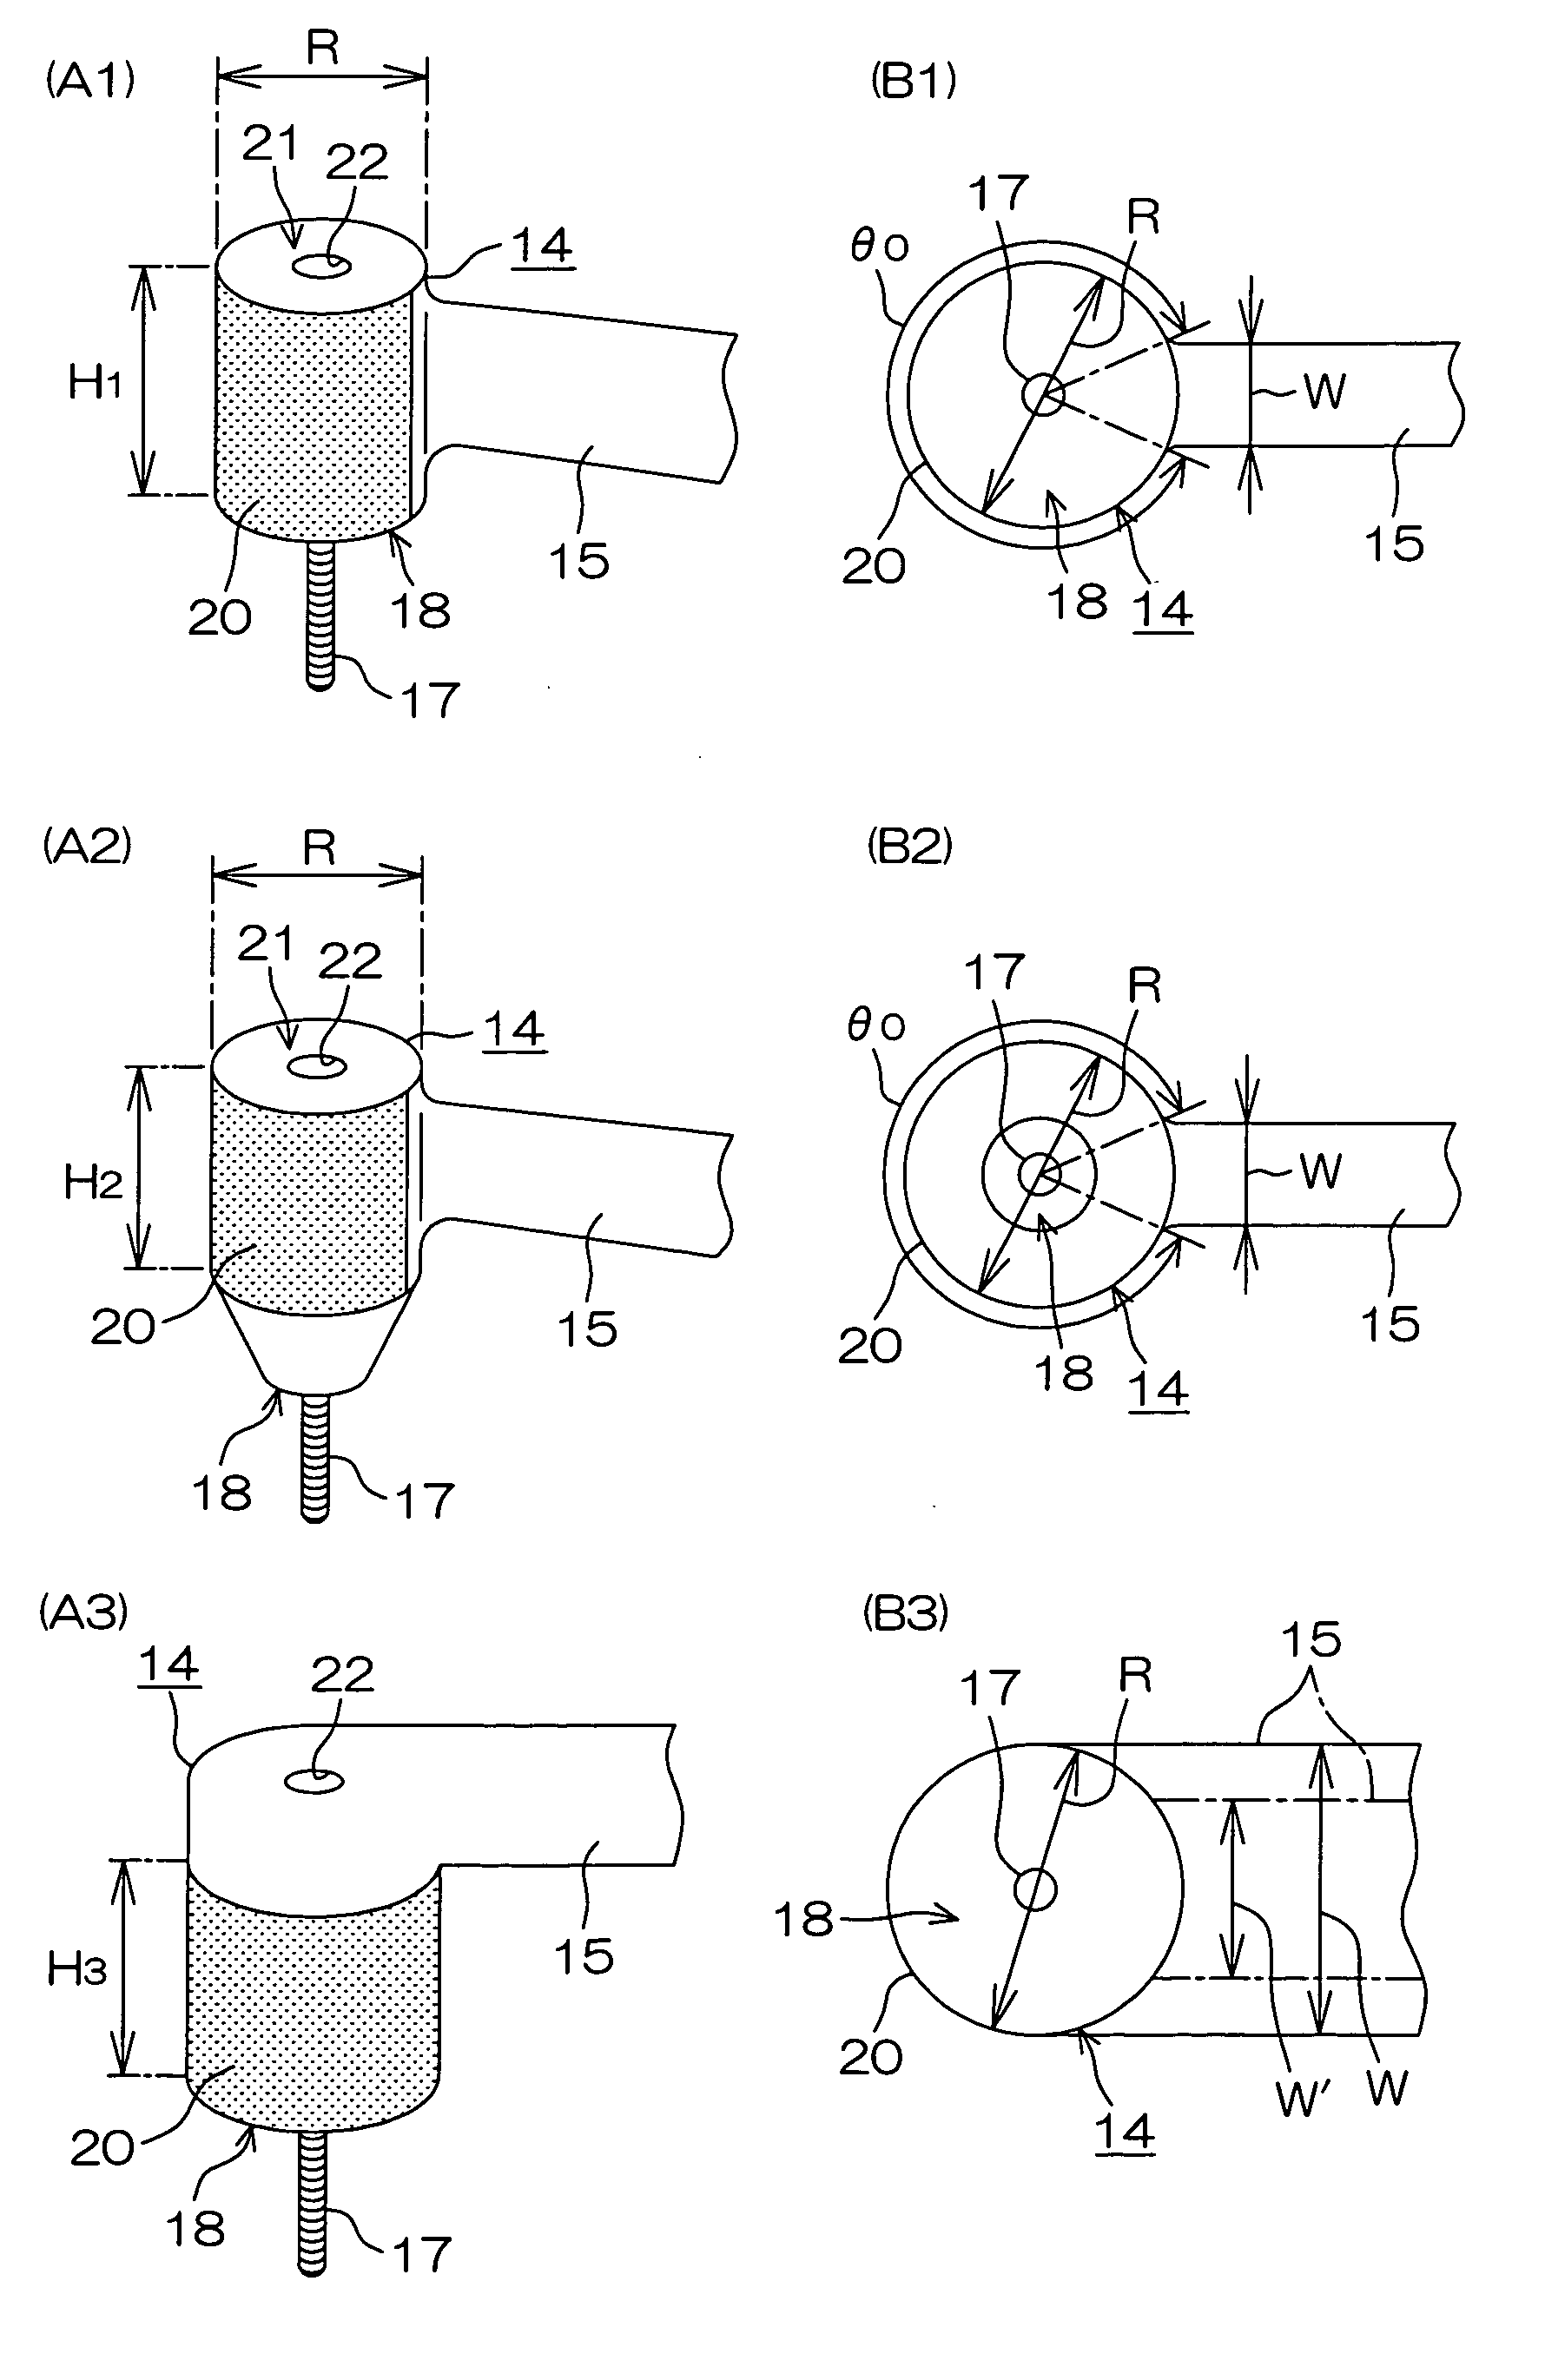 Implant erecting drill toll, hand-piece, adaptor for the hand-piece, and surgical guide